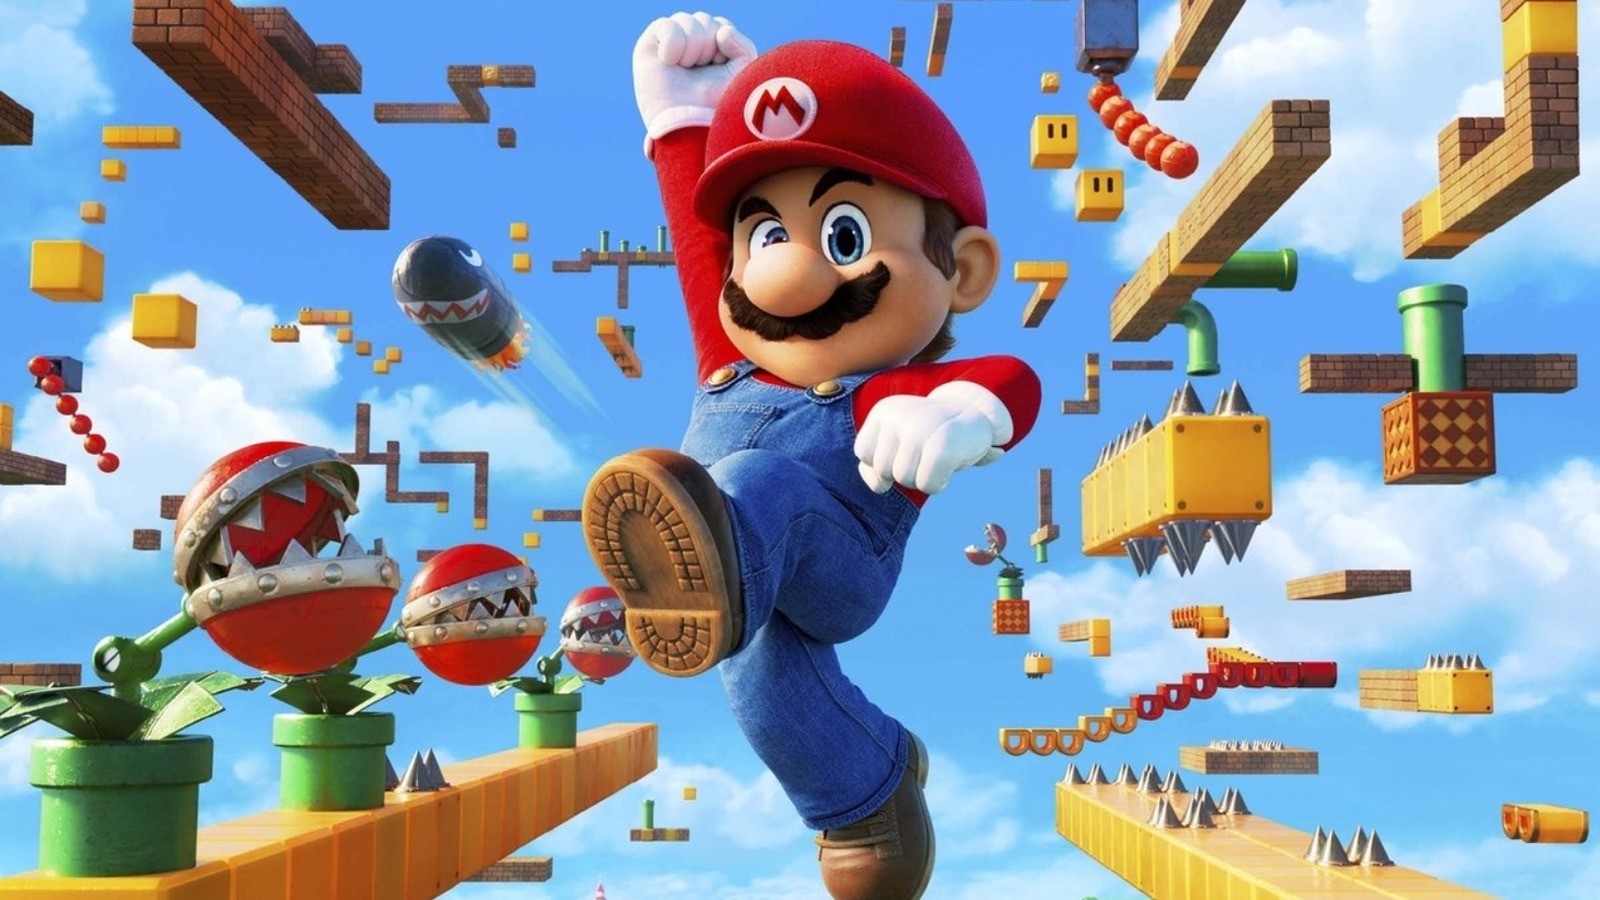 The movie Super Mario Bros. is now one of the 20 greatest movies ever at the box office